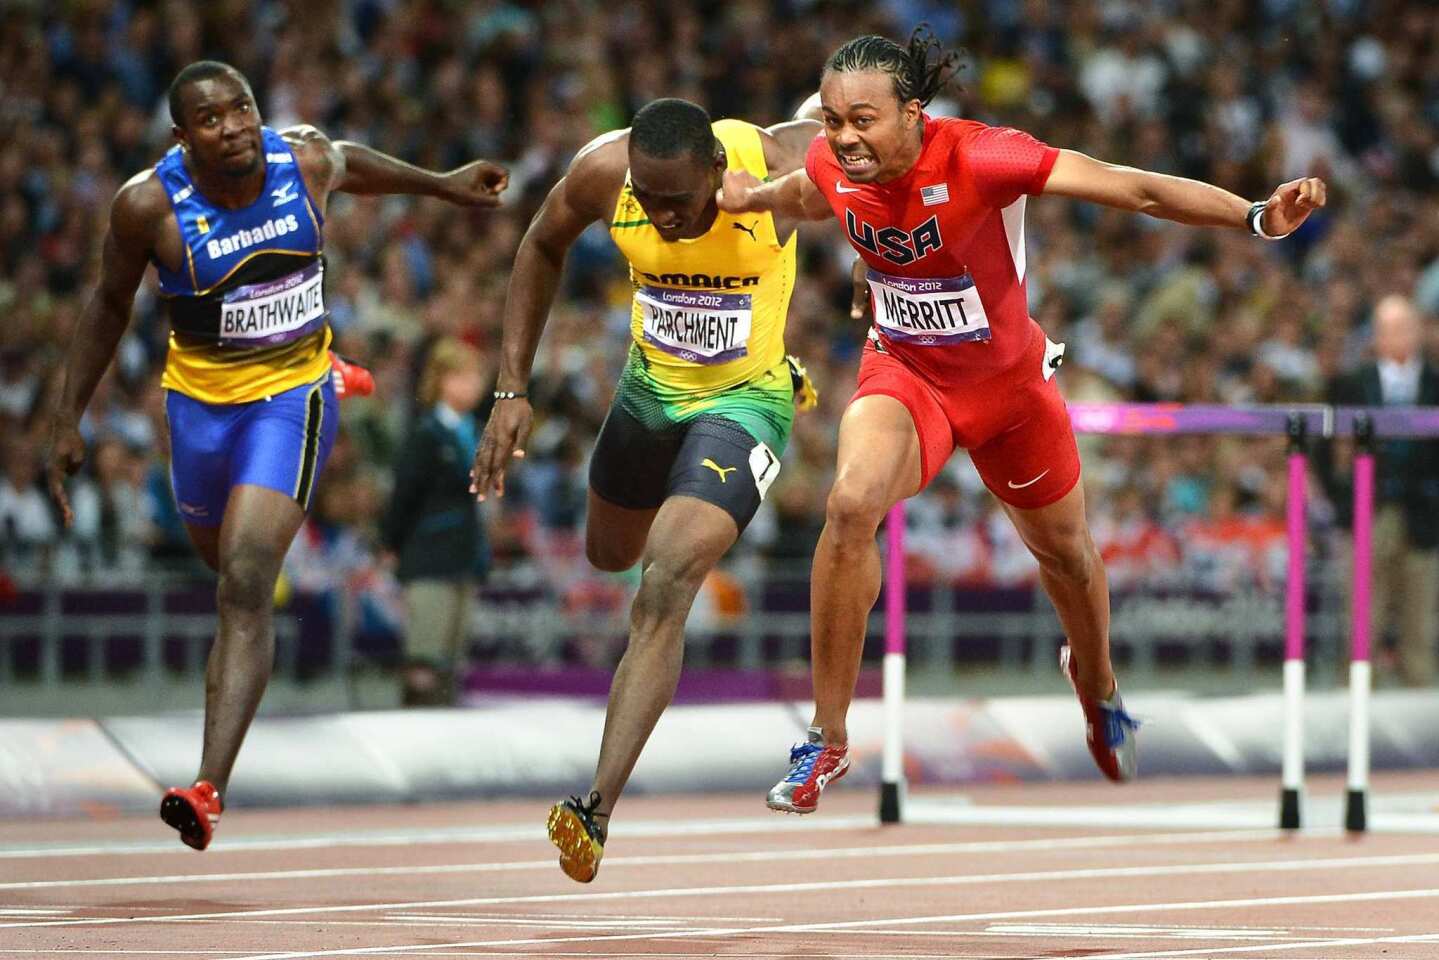 Team USA's Aries Merritt, right, crosses the finish line in front of Barbados' Ryan Brathwaite, left, and Jamaica's Hansle Parchment to win the gold medal in the 110-meter hurdles at the 2012 London Olympics. Jason Richardson of the U.S. won silver.